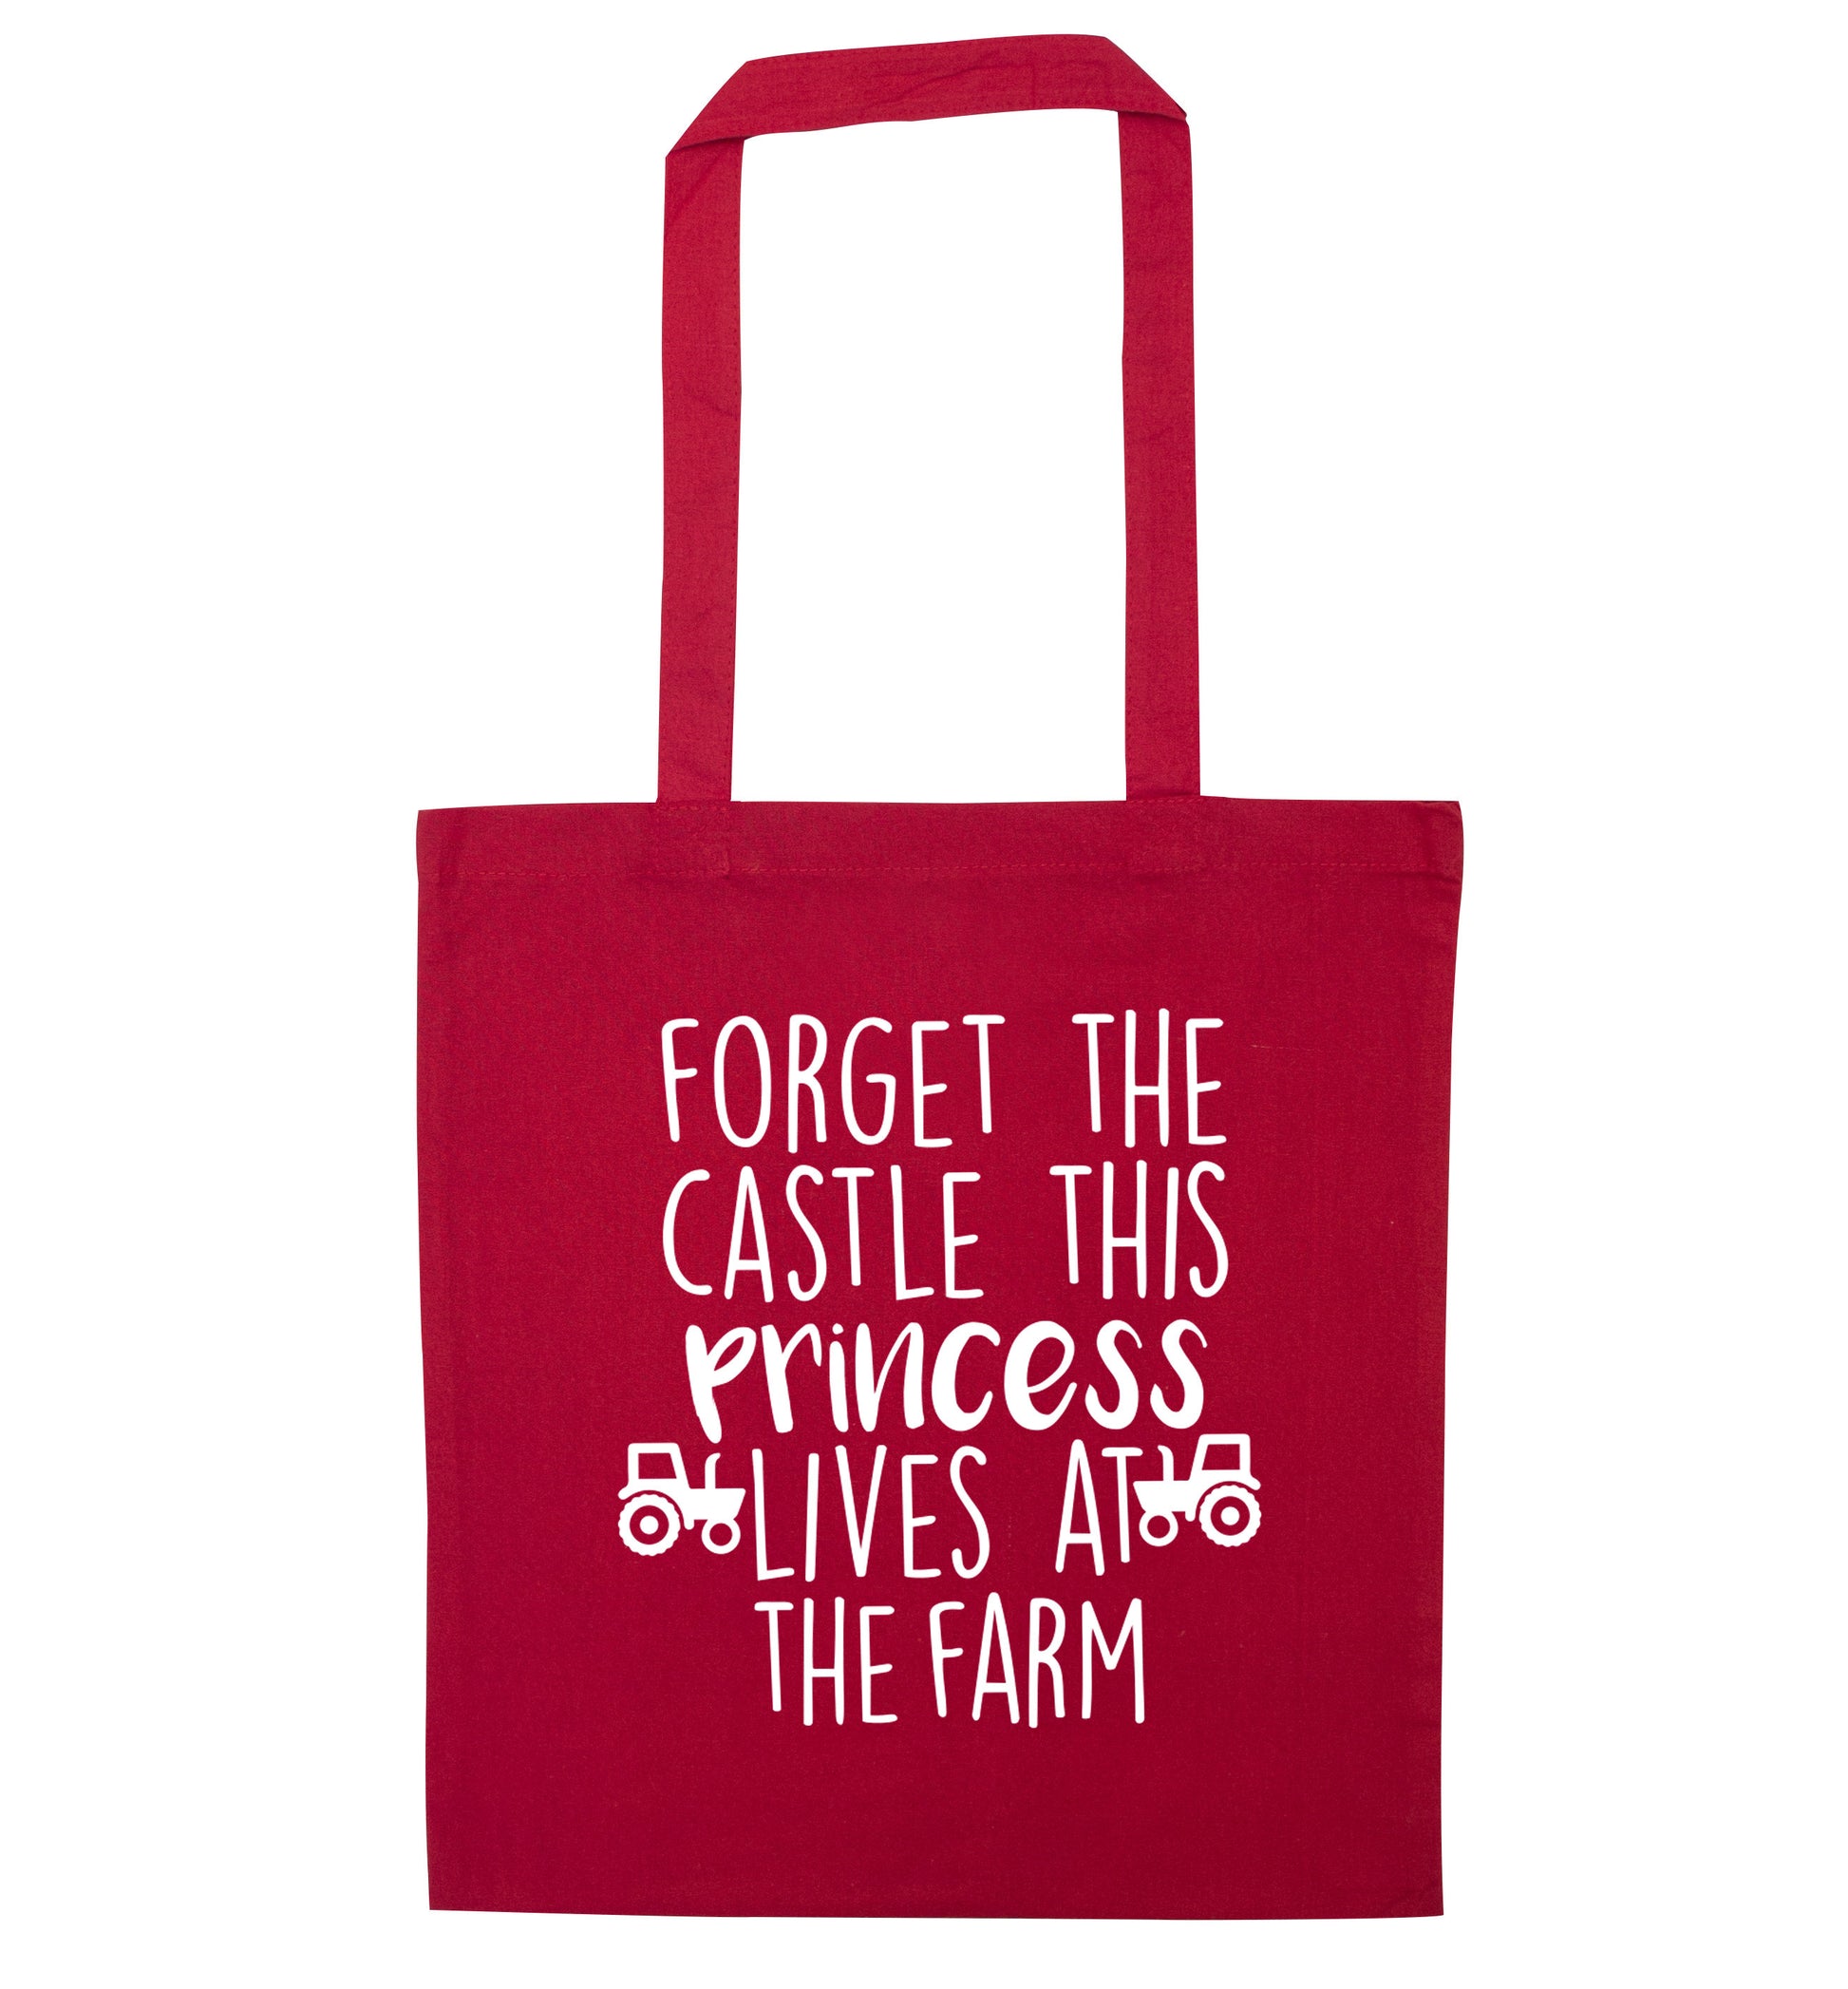 Forget the castle this princess lives at the farm red tote bag